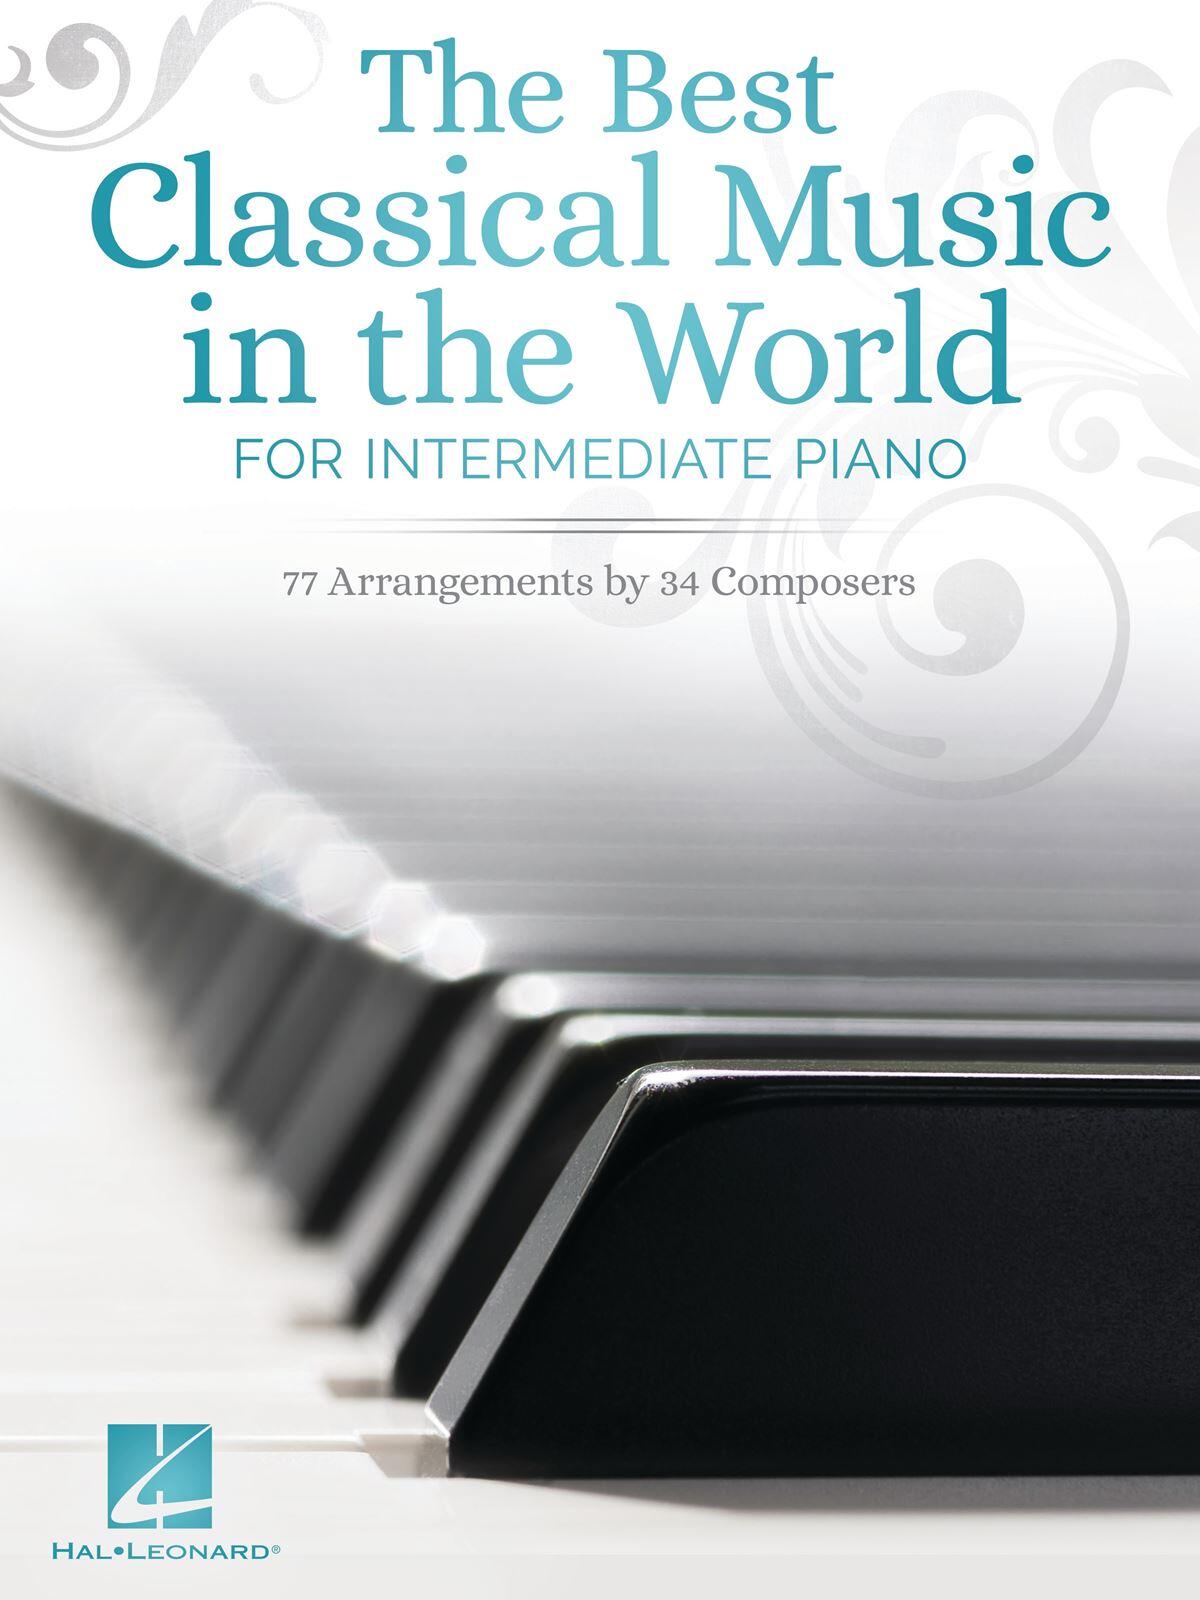 The Best Classical Music in the World for Intermediate Piano : photo 1